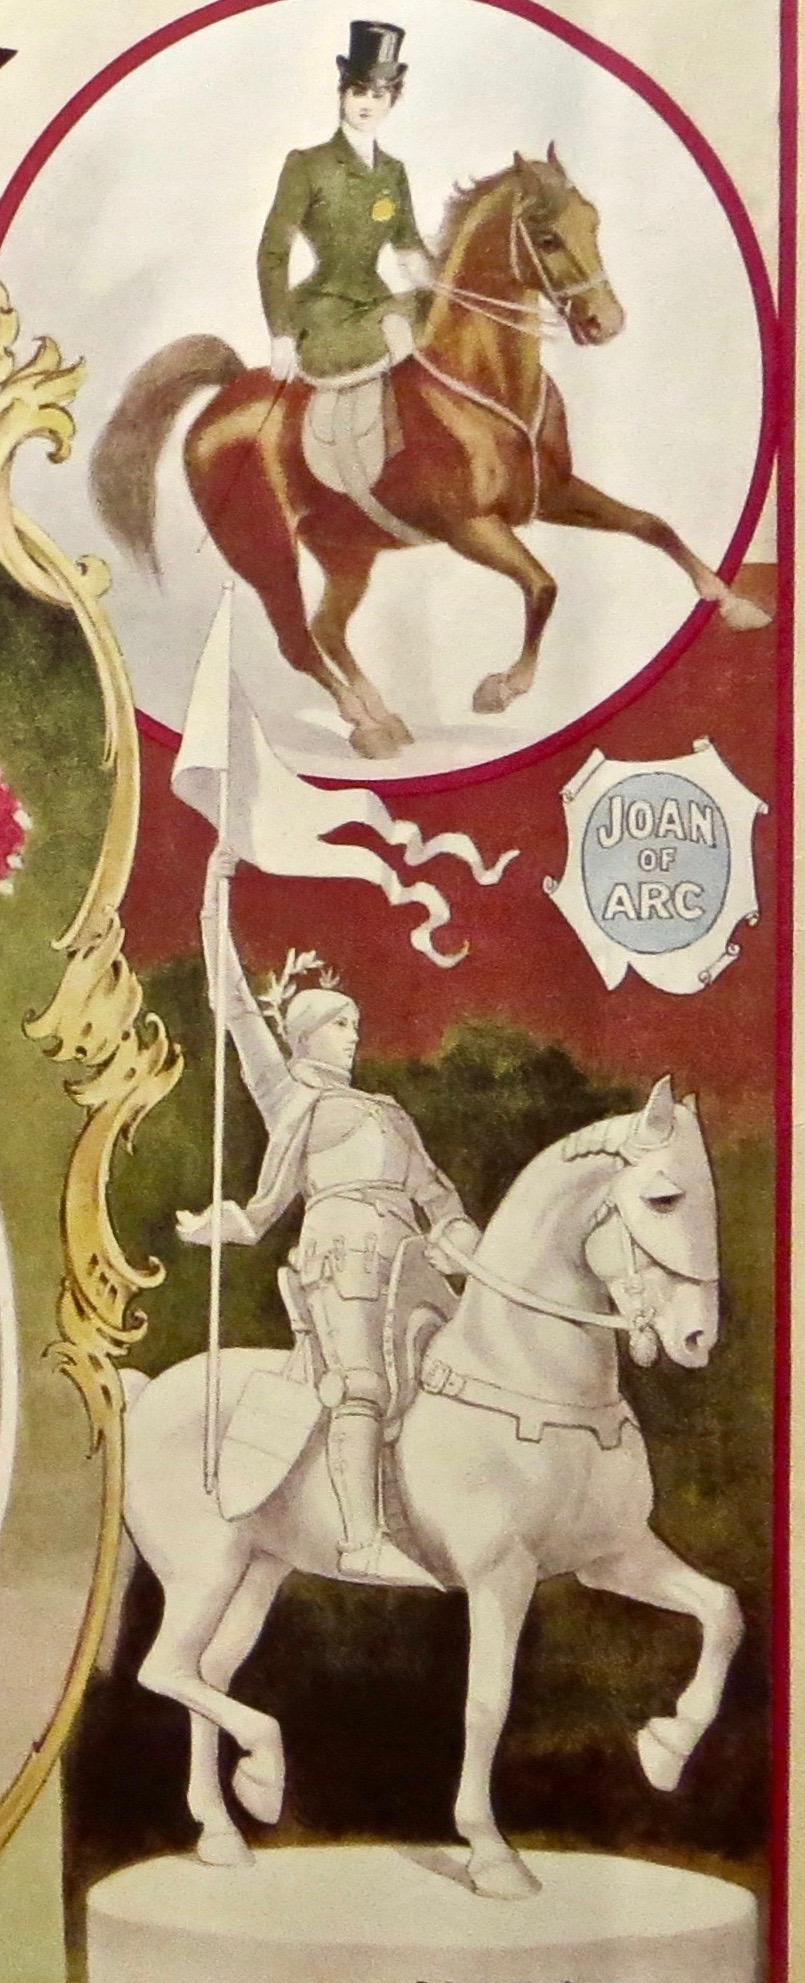 Folk Art Equestrian Circus Poster by Ringling Bros Ca. 1971 Featuring 